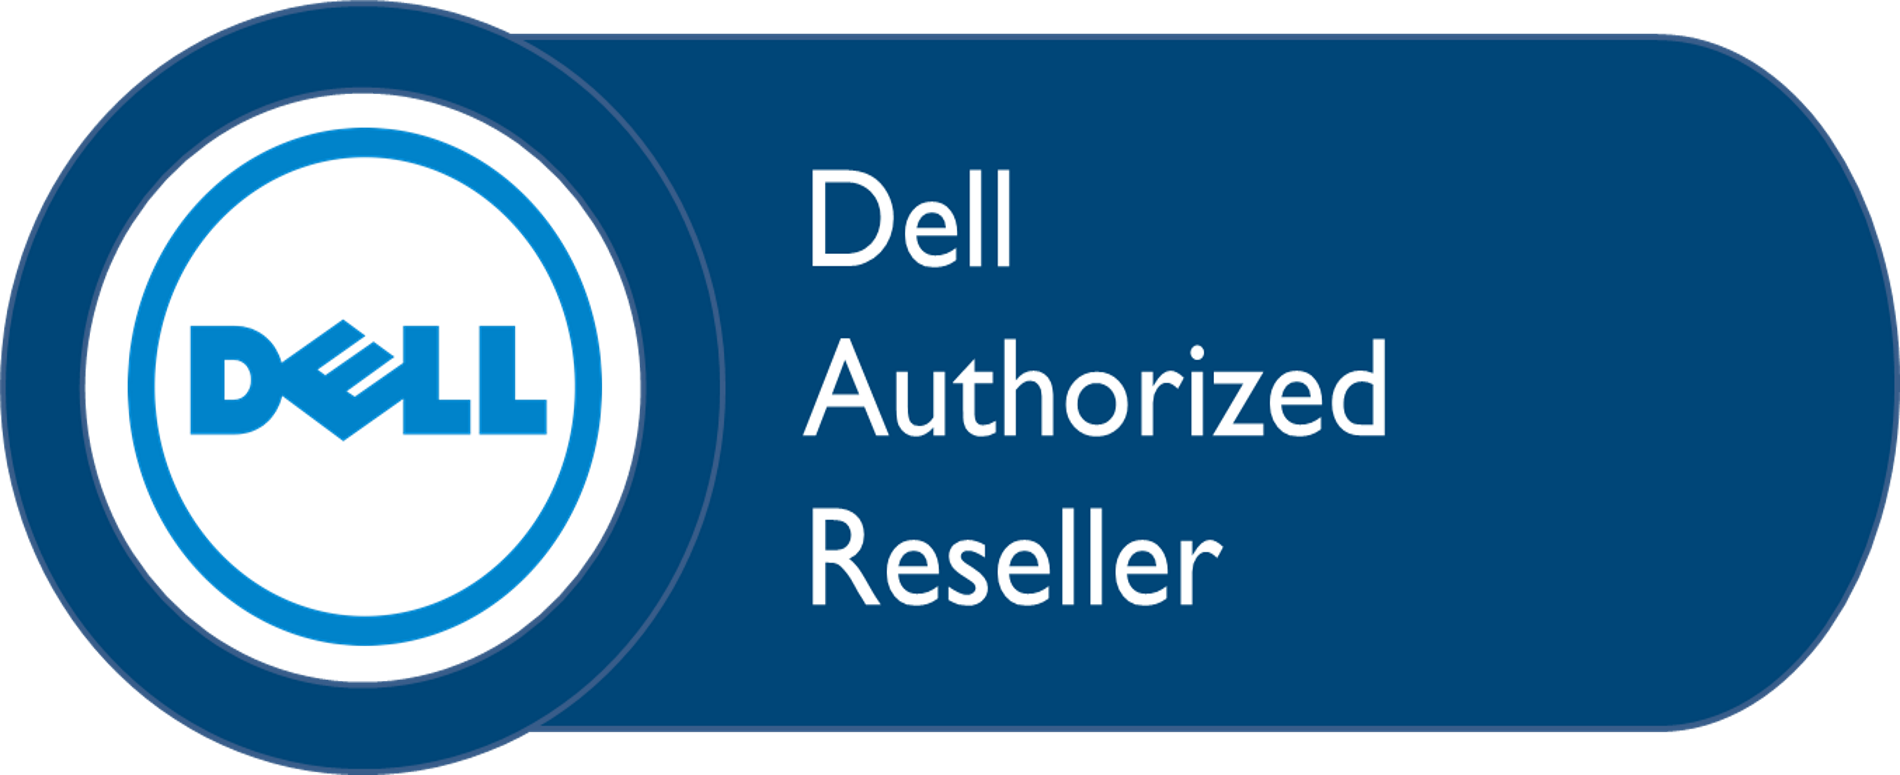 Authorized Reseller - партнер бренда Dell